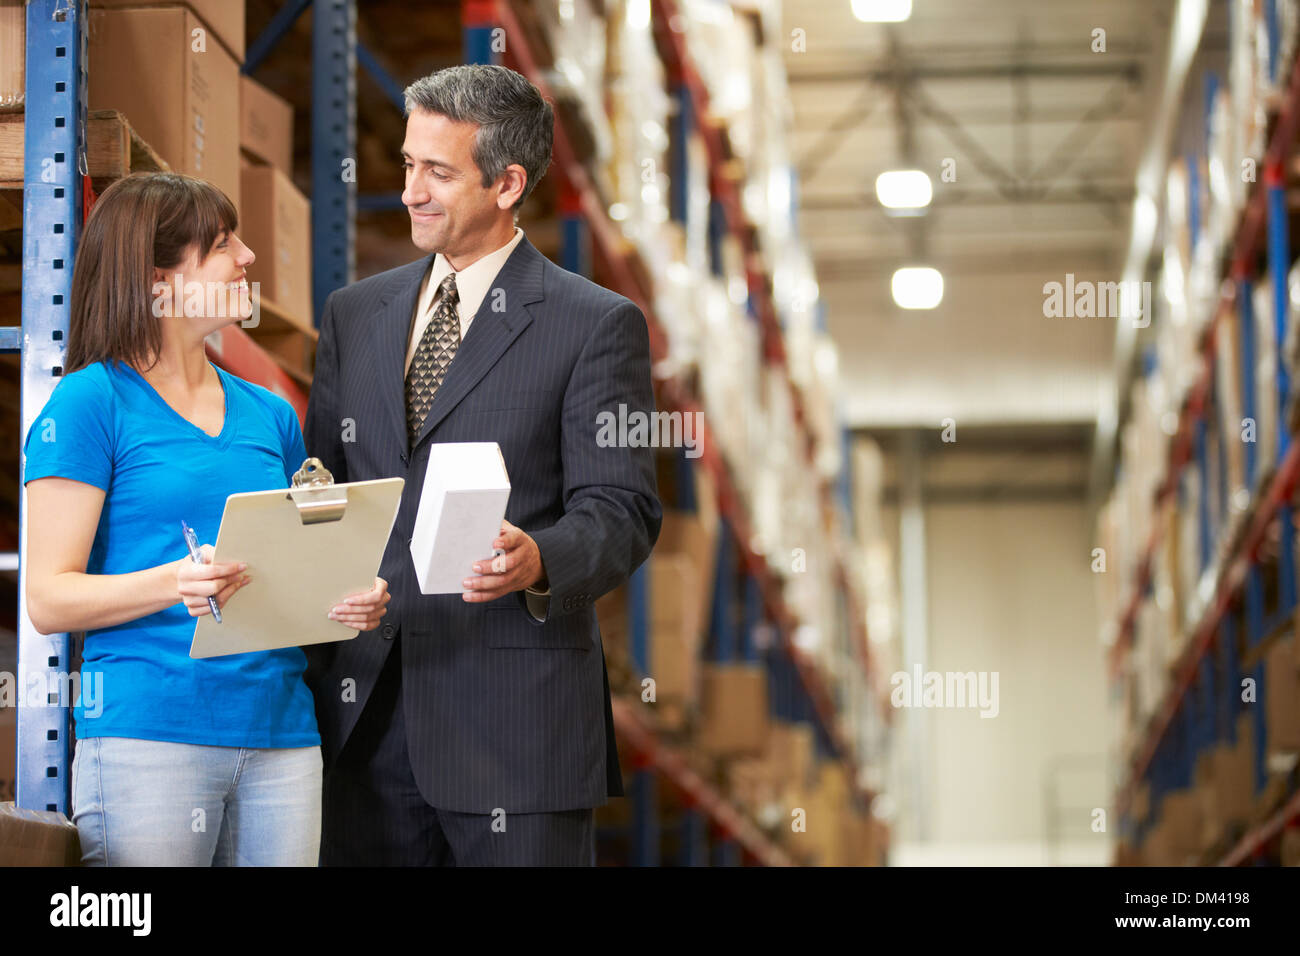 Businessman And Female Worker In Distribution Warehouse Stock Photo